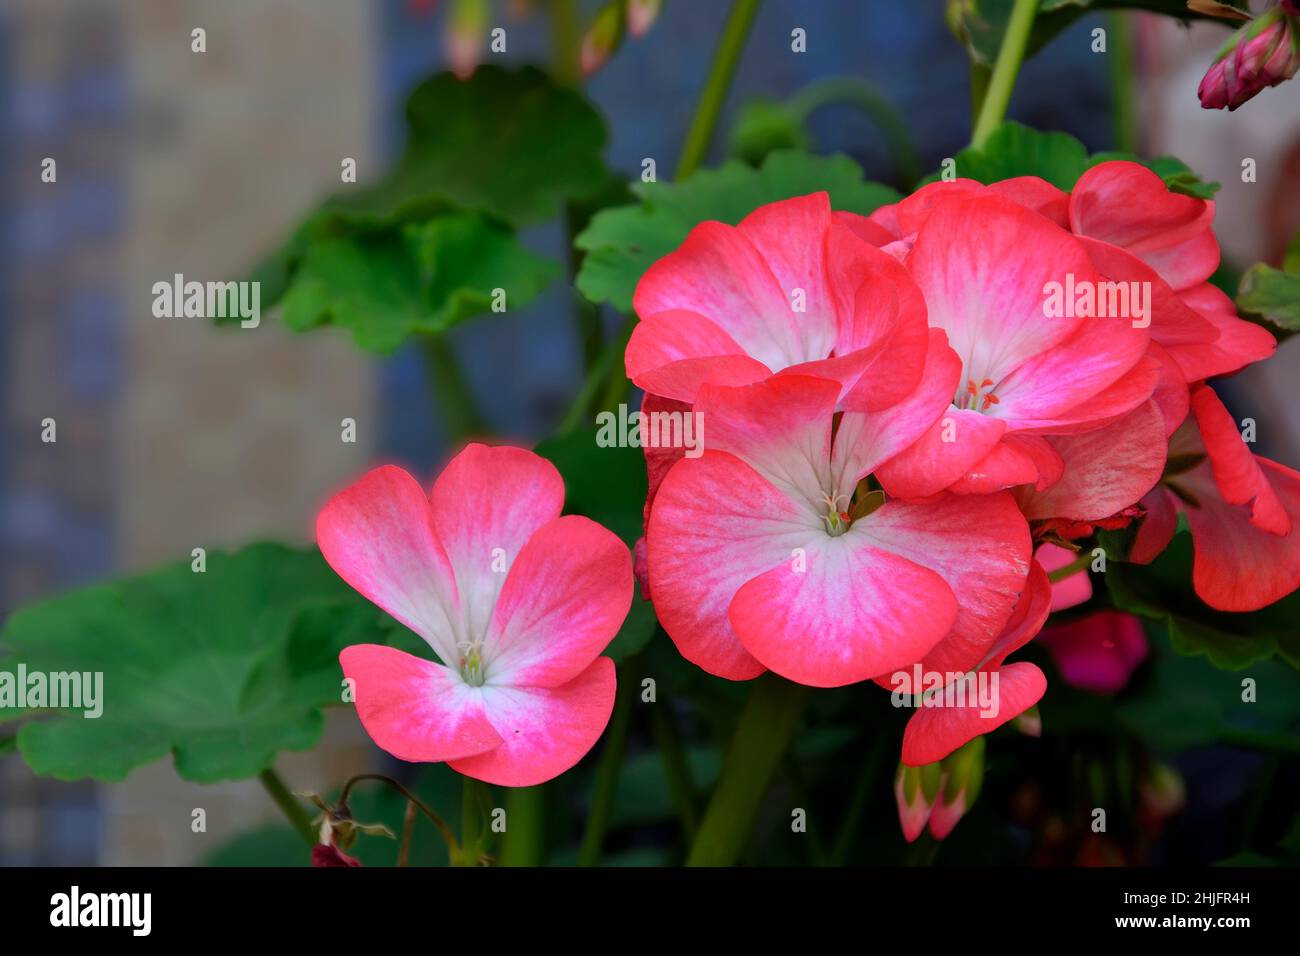 Bright pink Geranium Pelargomium blossom close up on blurred background. Spring or summer floral background. Ornamental flowering plant - floriculture Stock Photo